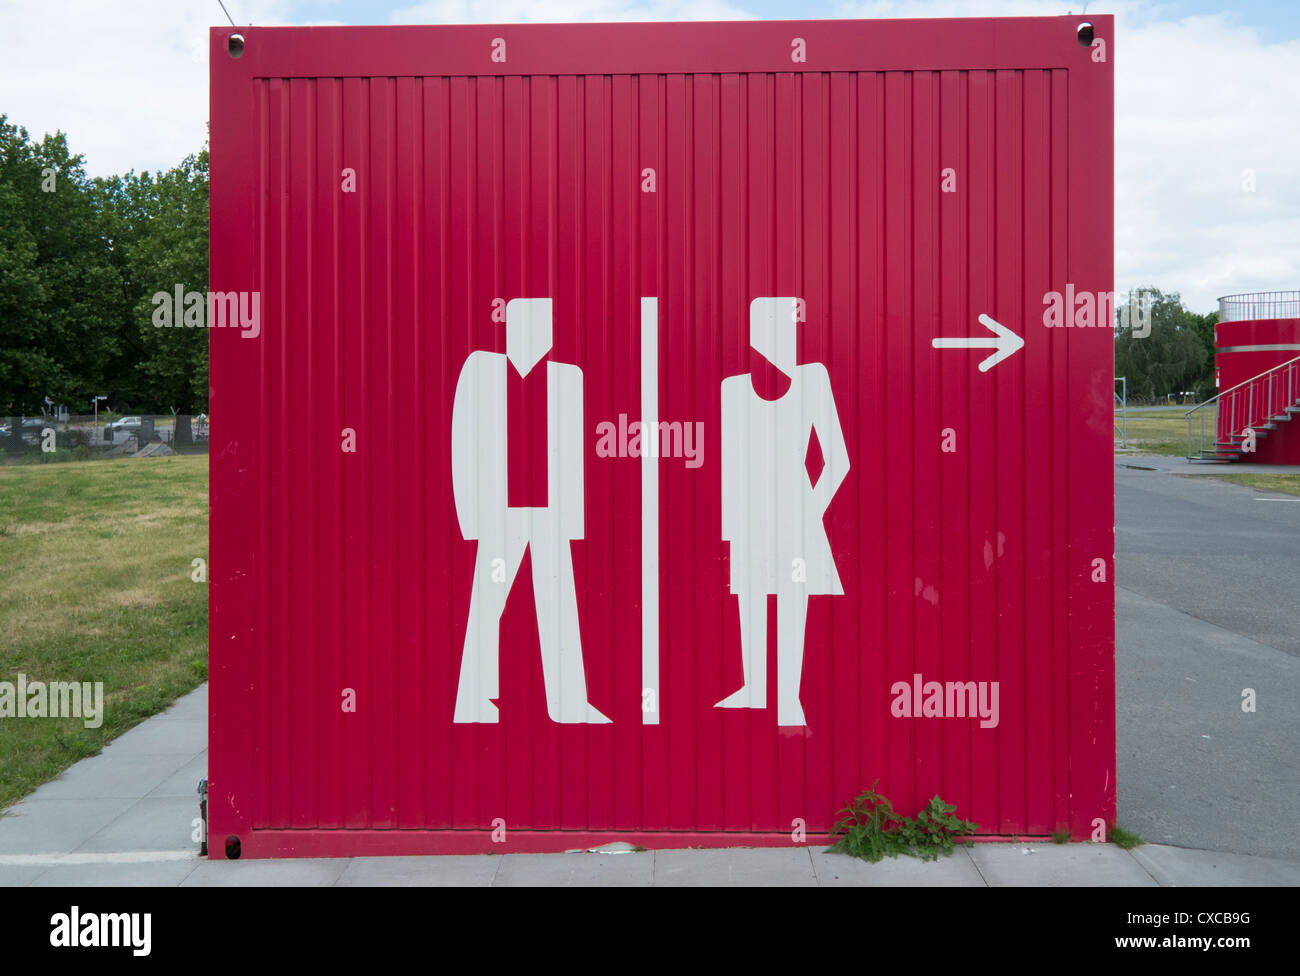 Signs for public toilets on outdoor toilet block Stock Photo